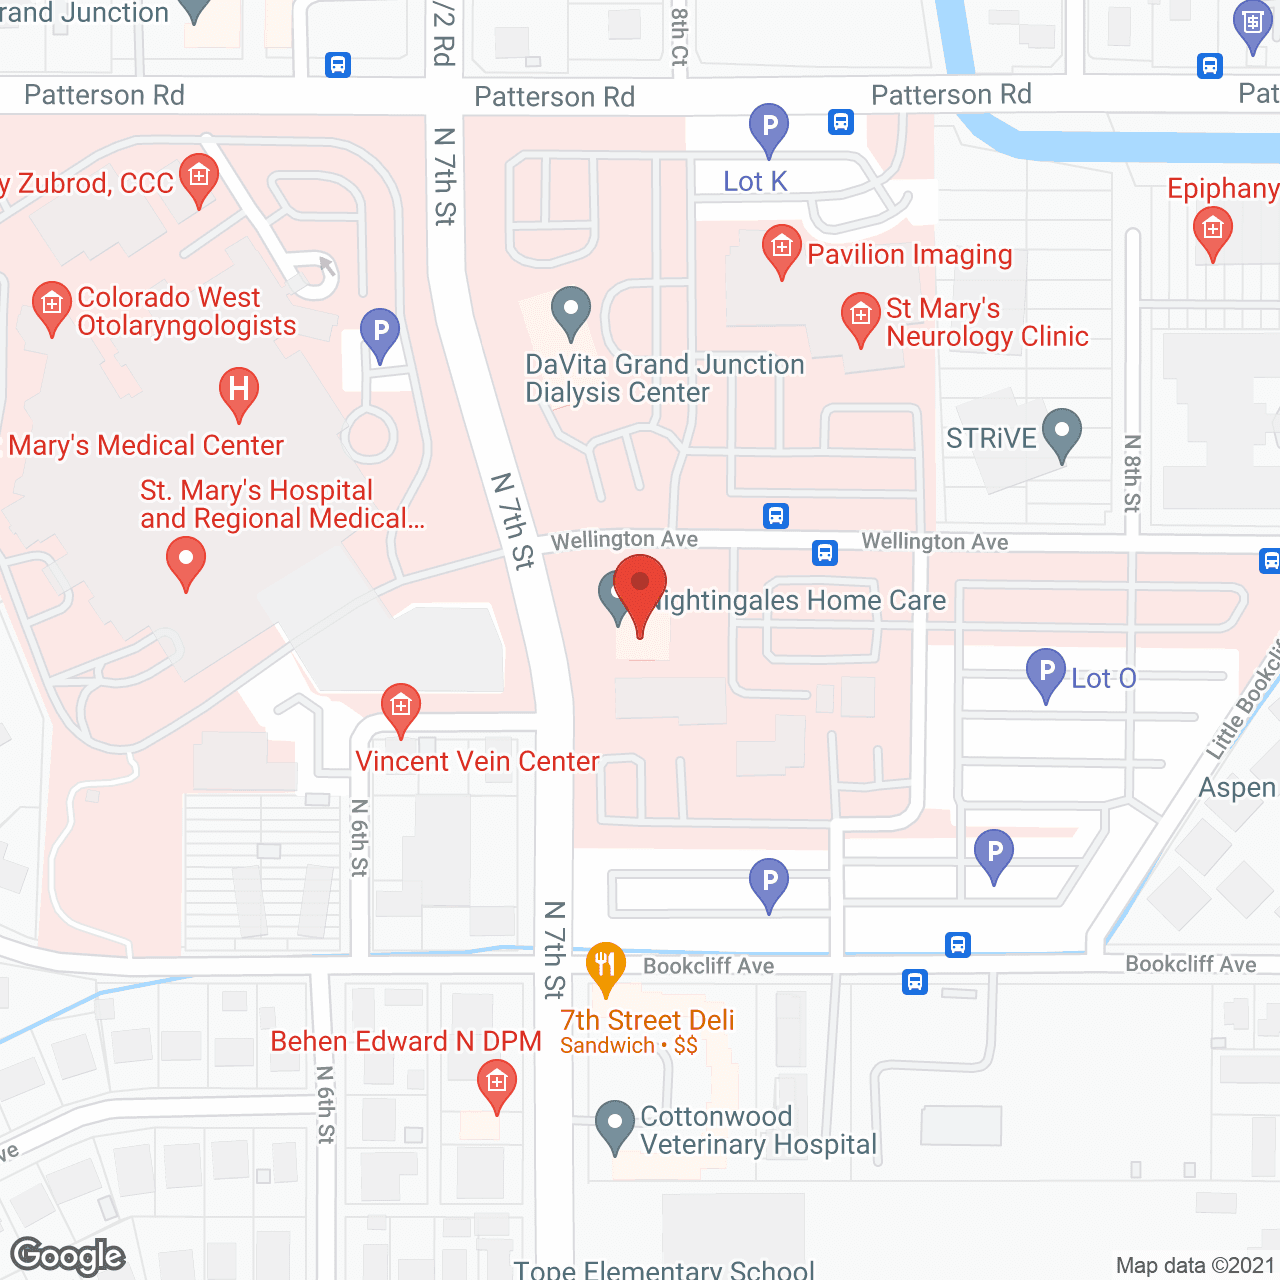 Nightingale's Home Care in google map